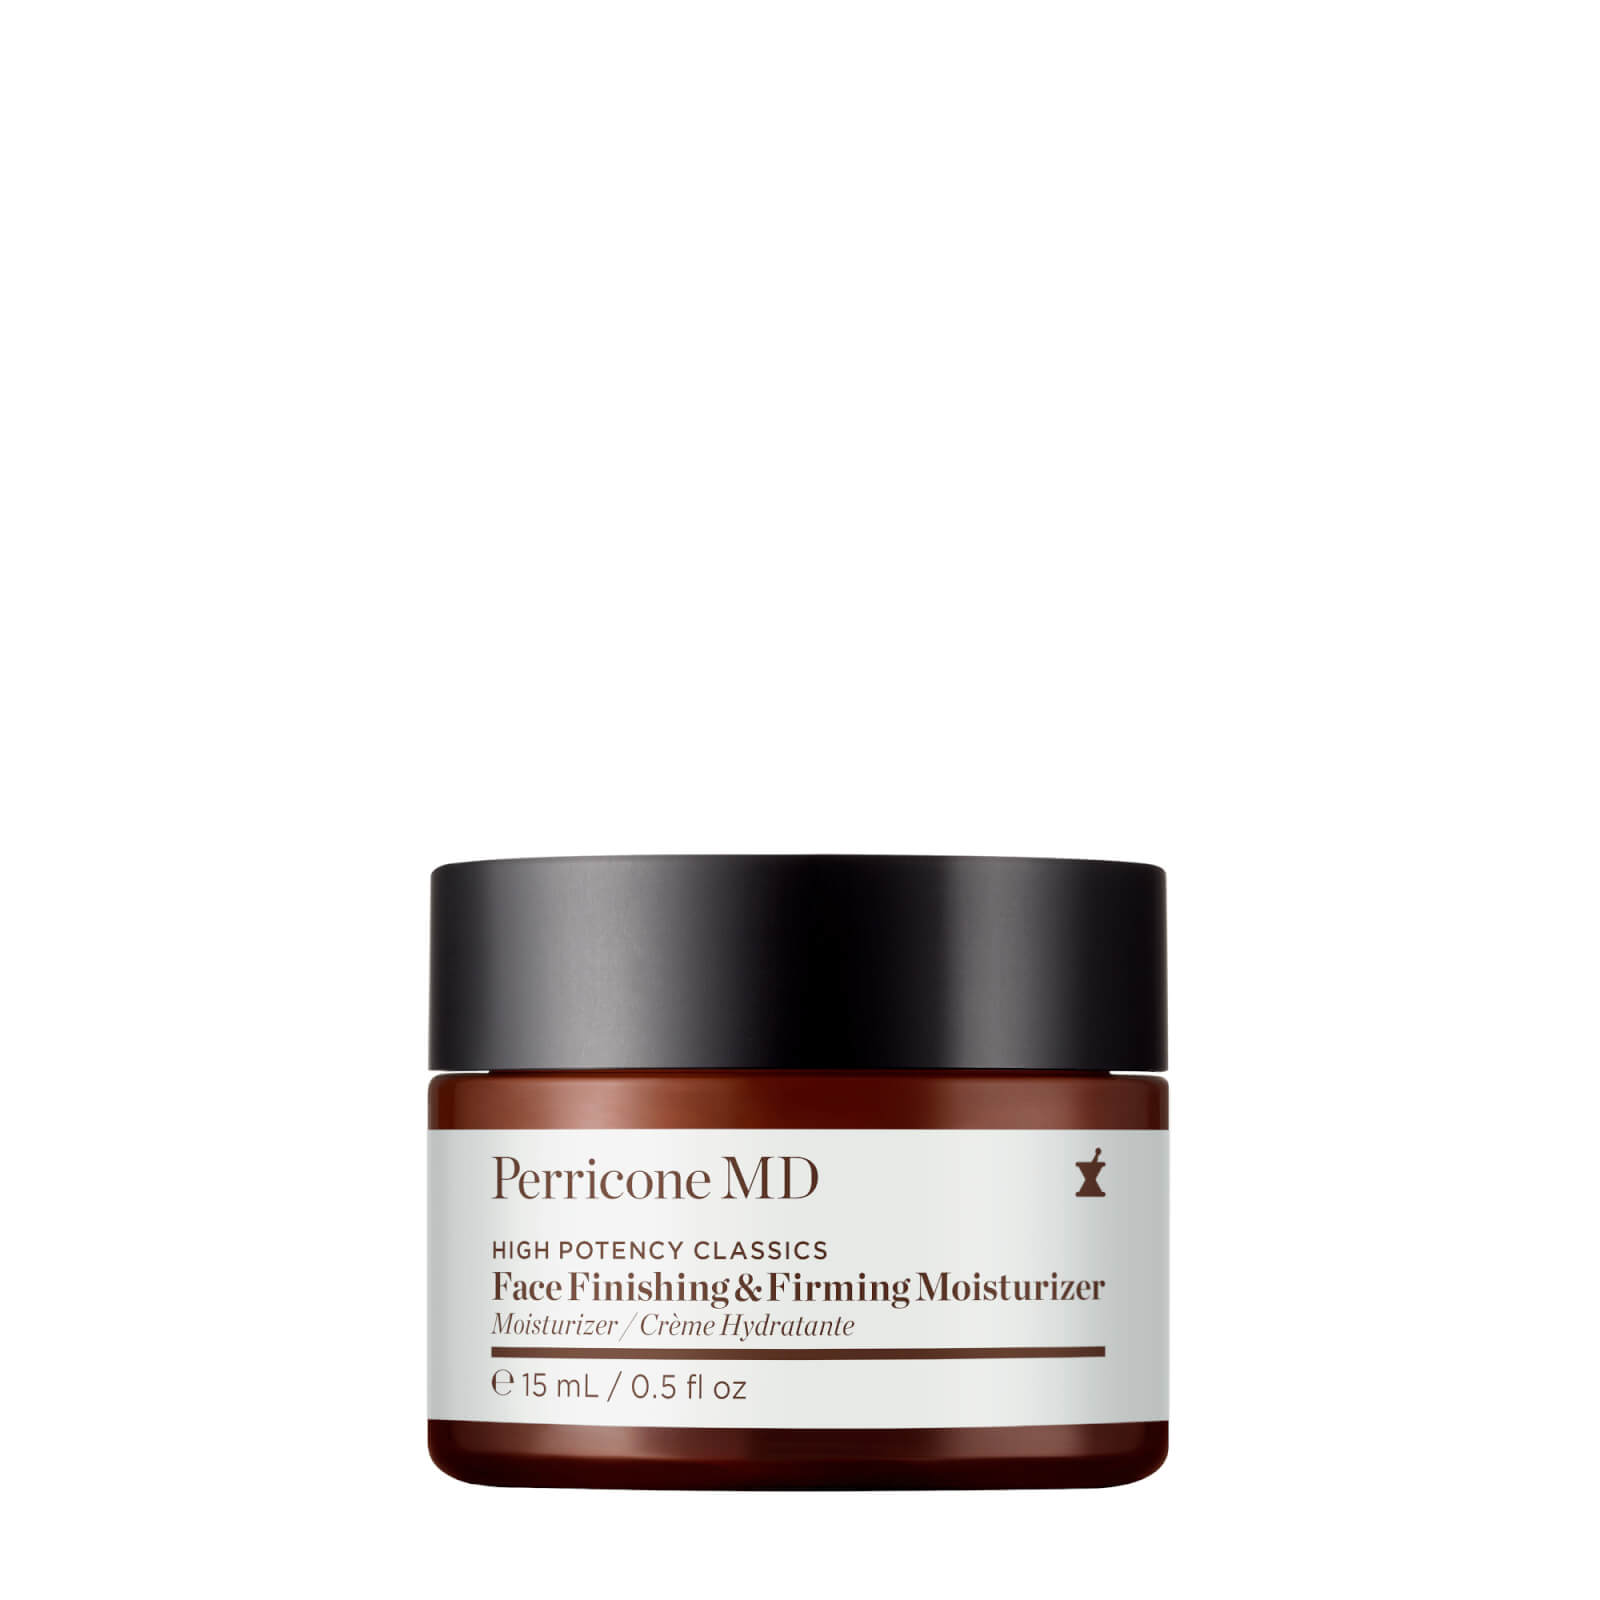 Perricone Md High Potency Classics Face Finishing & Firming Moisturizer